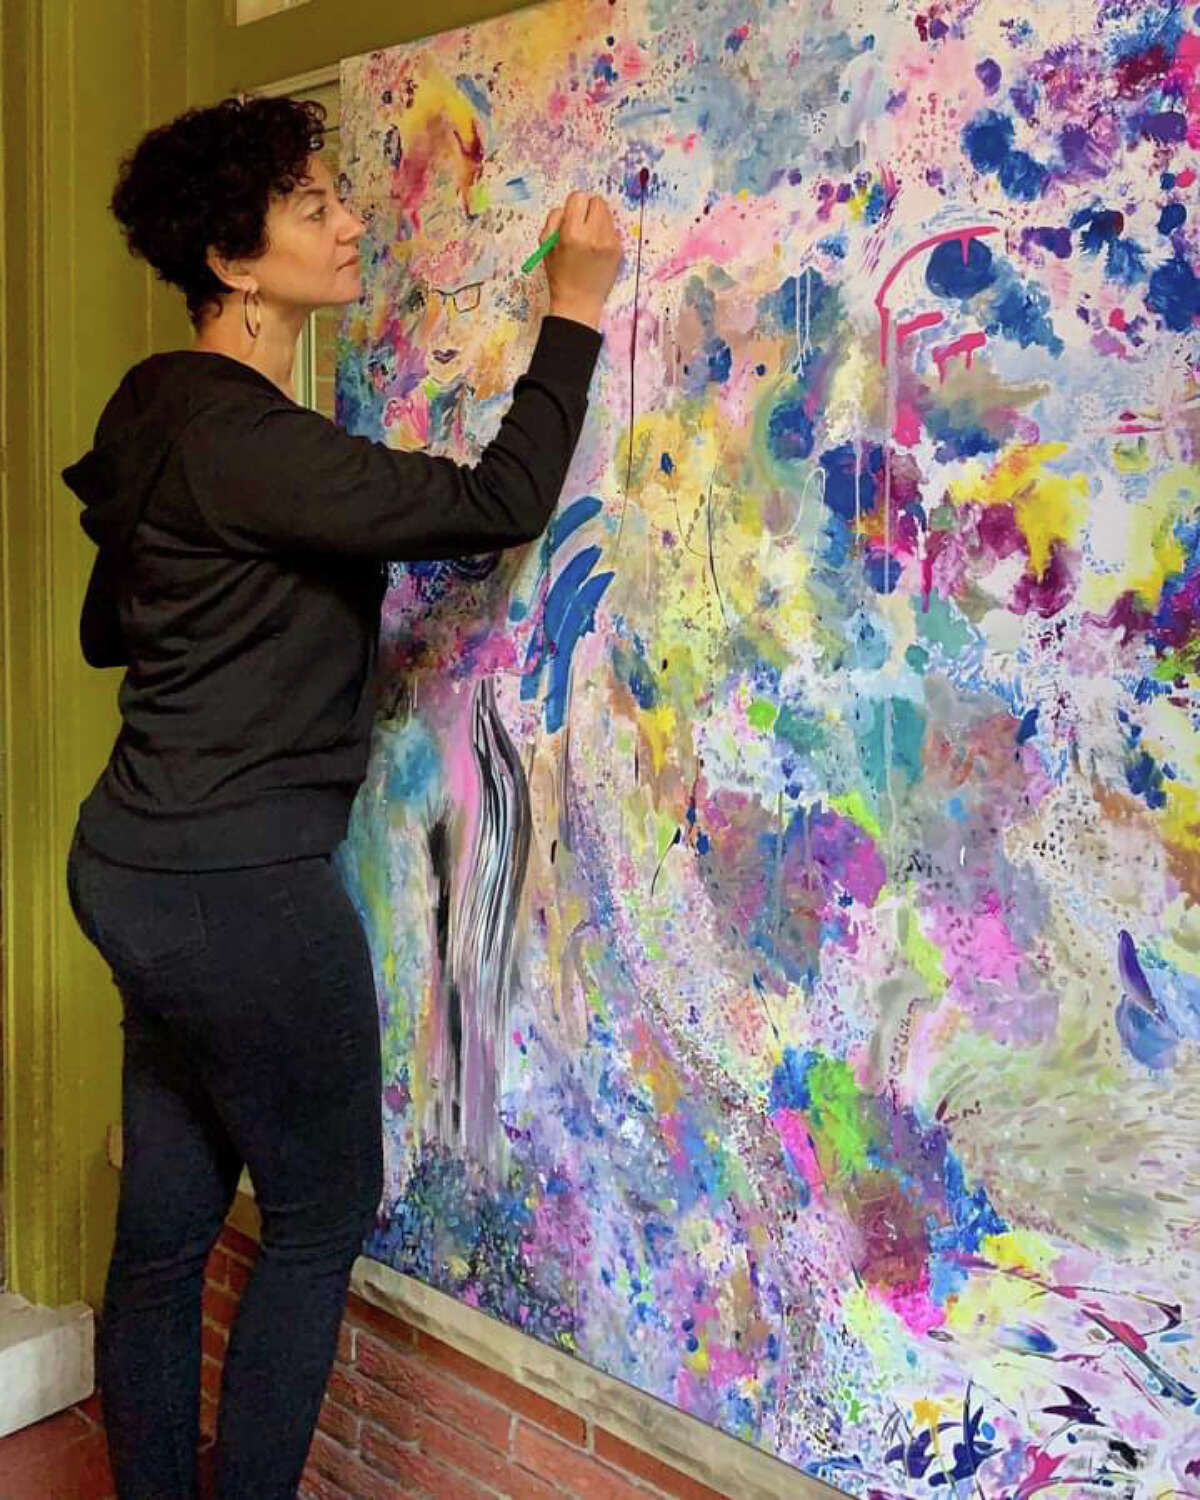 Nicolena Stubbs, whose art will be displayed in an exhibition honoring Black History Month, has always been artistically talented. However, she really dove into painting during the COVID pandemic. 